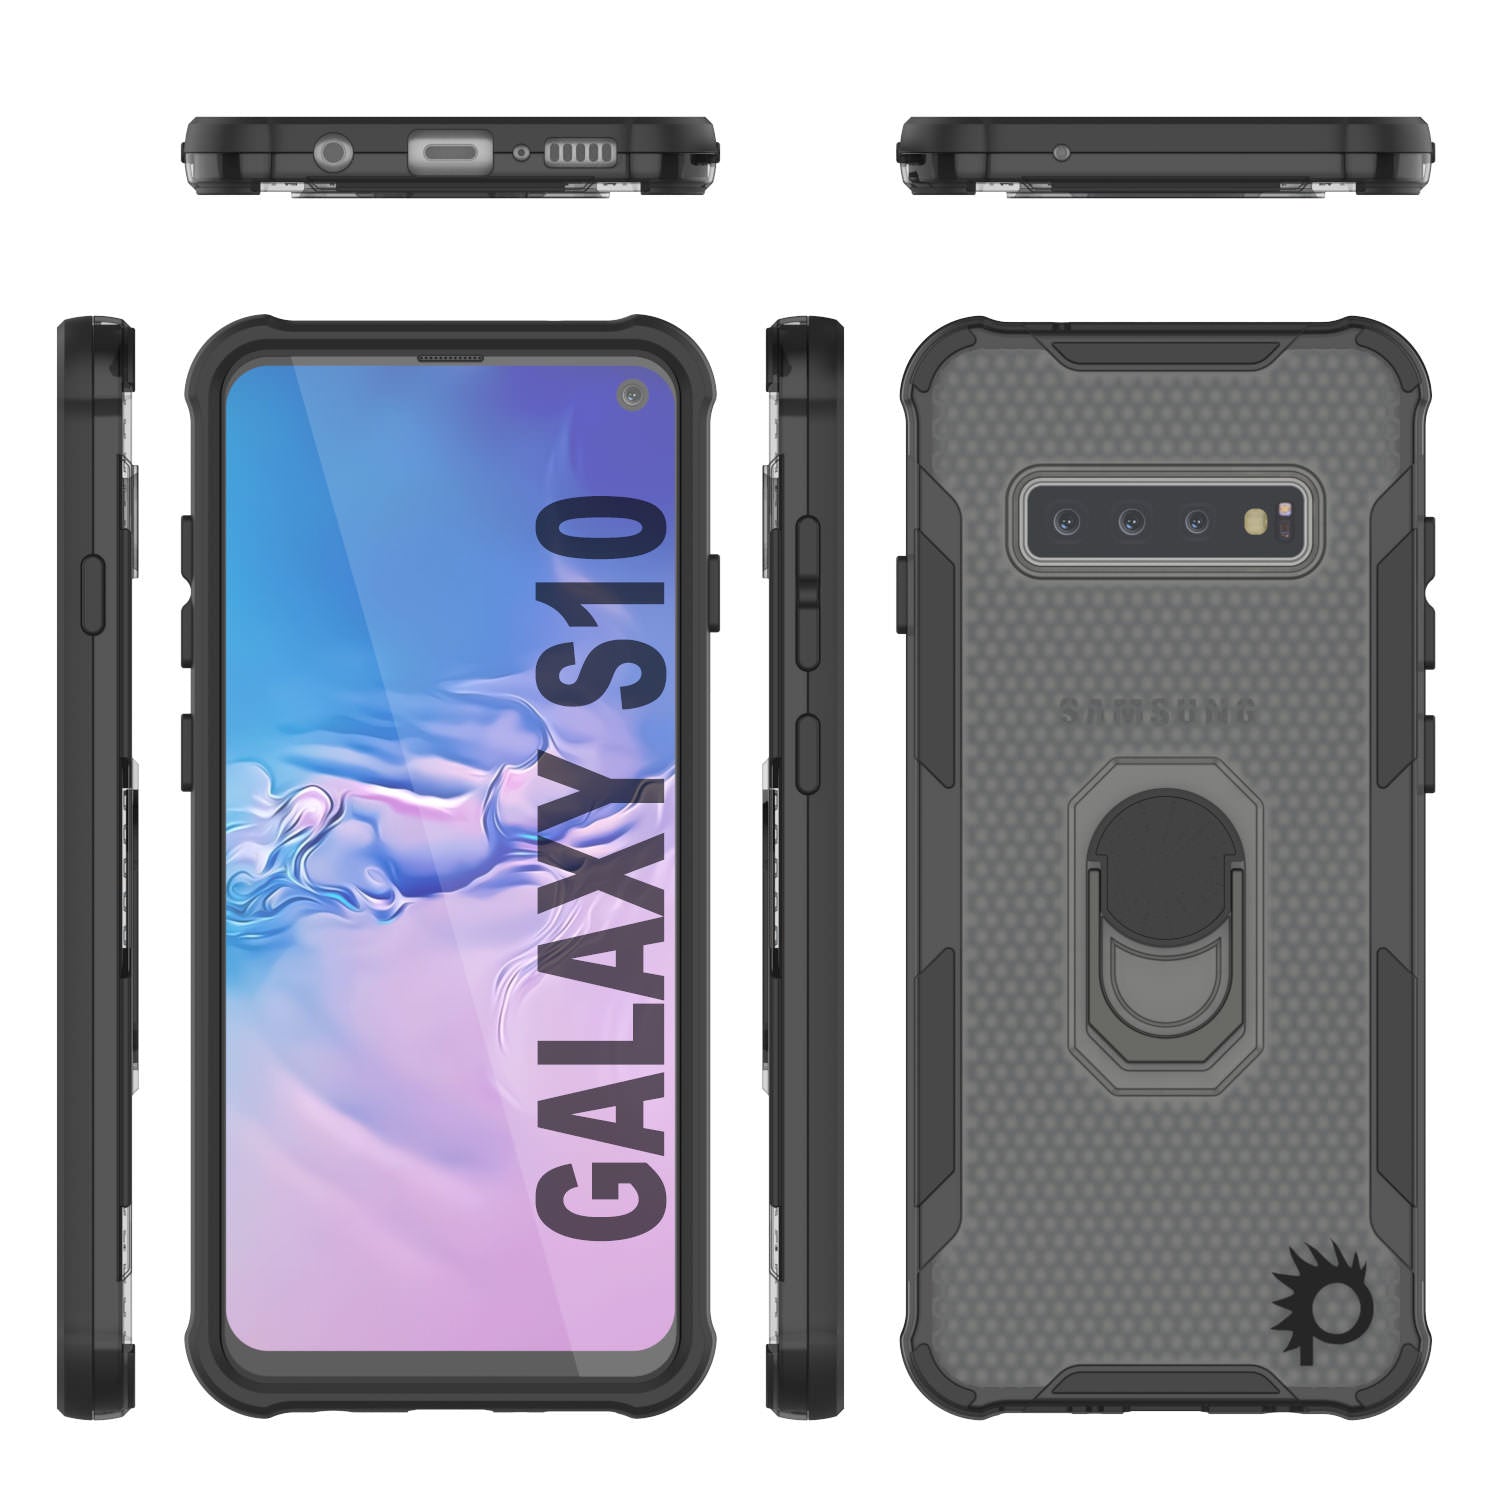 Punkcase Galaxy S10 Case [Magnetix 2.0 Series] Clear Protective TPU Cover W/Kickstand [Black]